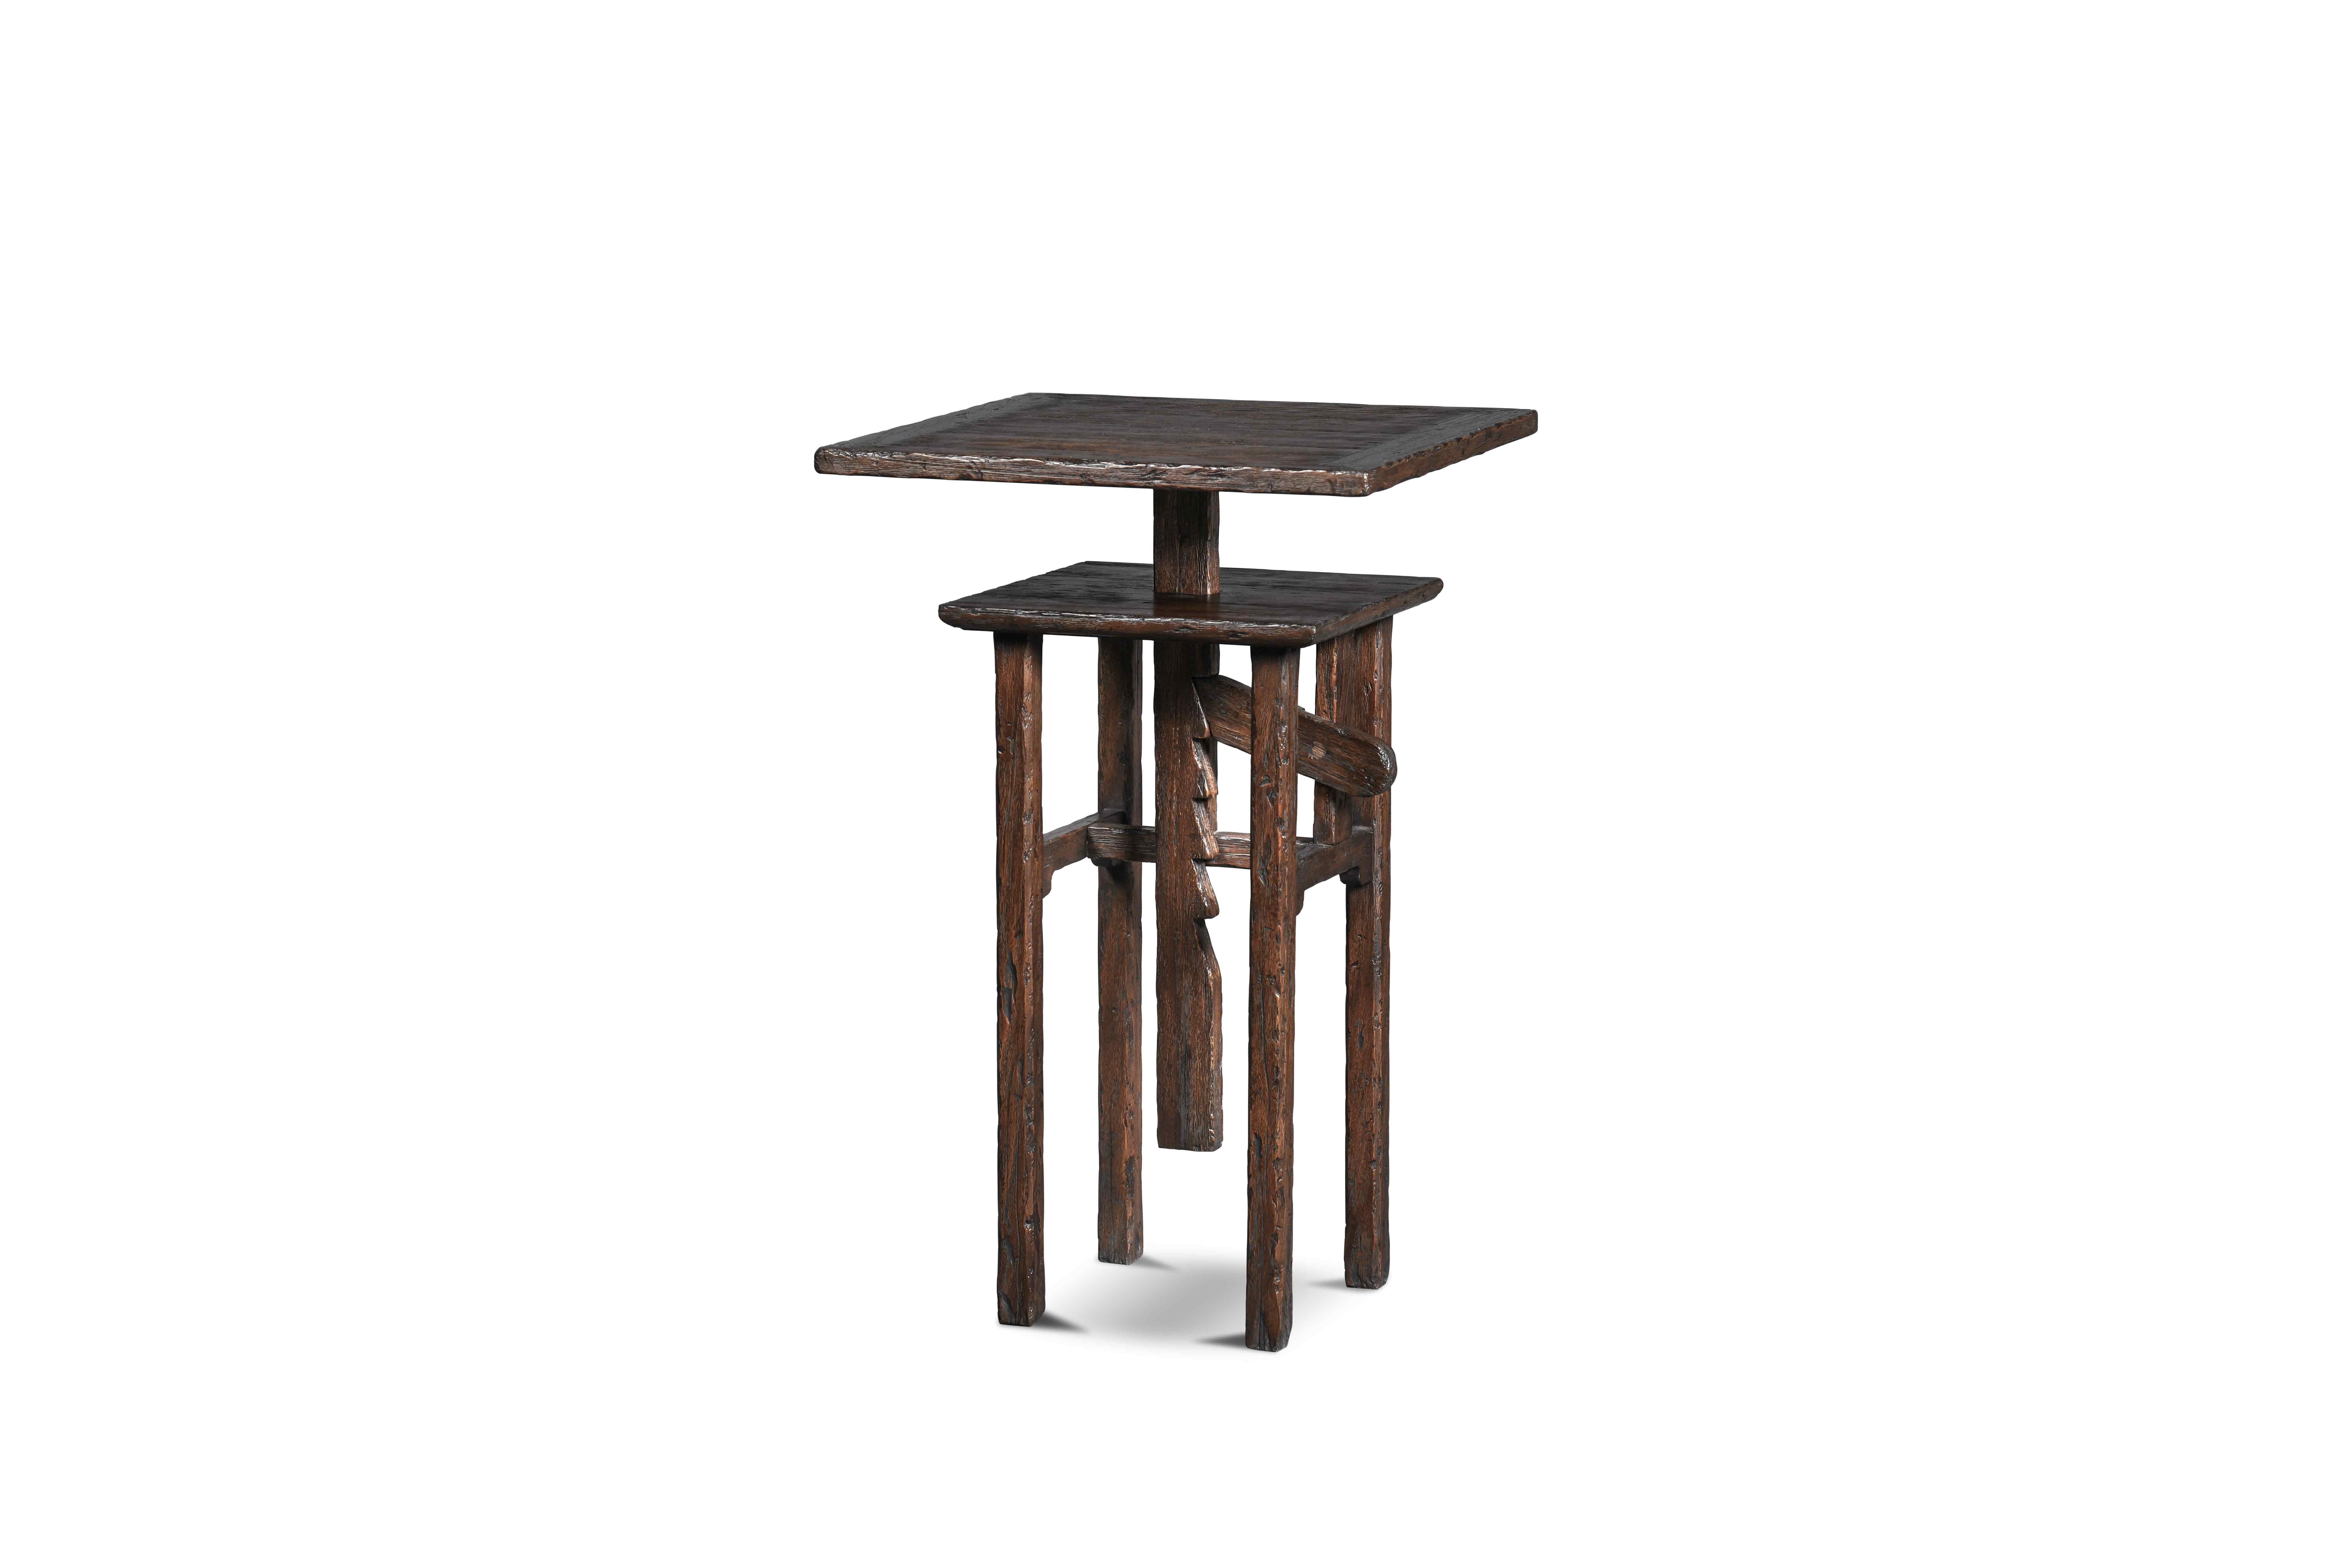 Decorative and functional, this pedestal is designed for showcasing objects d’art. Its mechanism is created so that the table top can be lifted to different heights for stylized versatility.